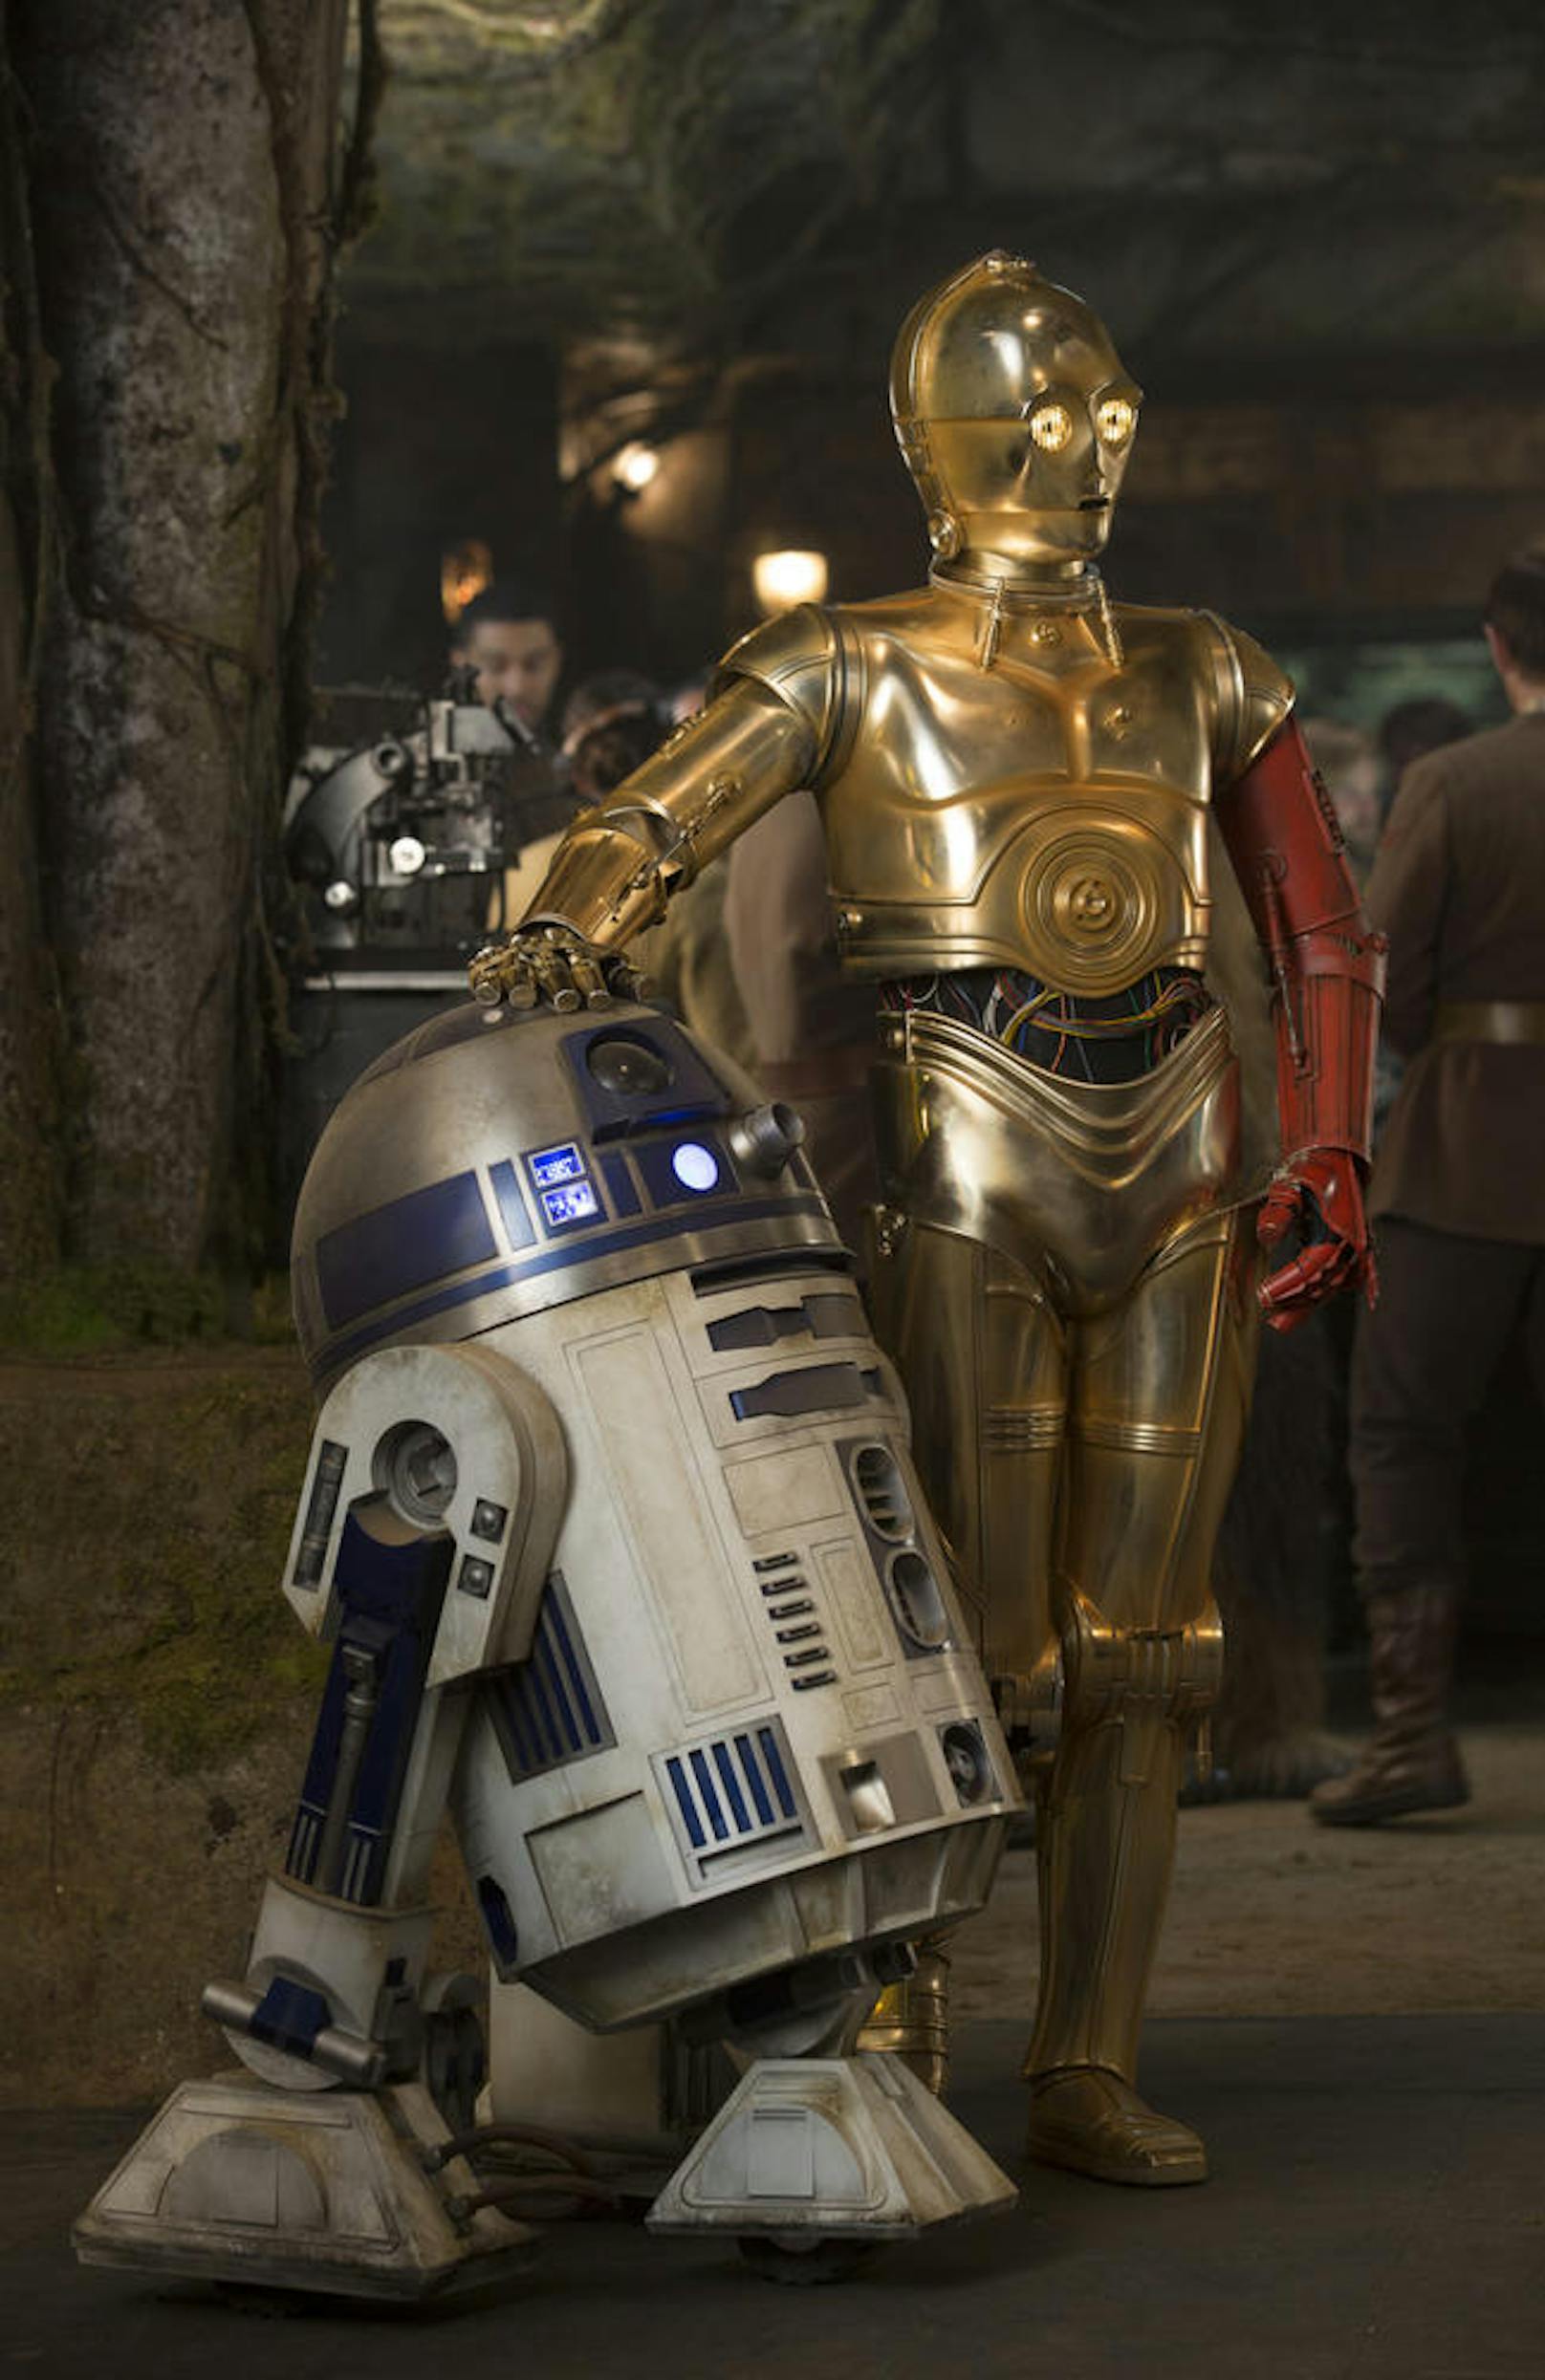 R2-D2 and C-3PO (Anthony Daniels)